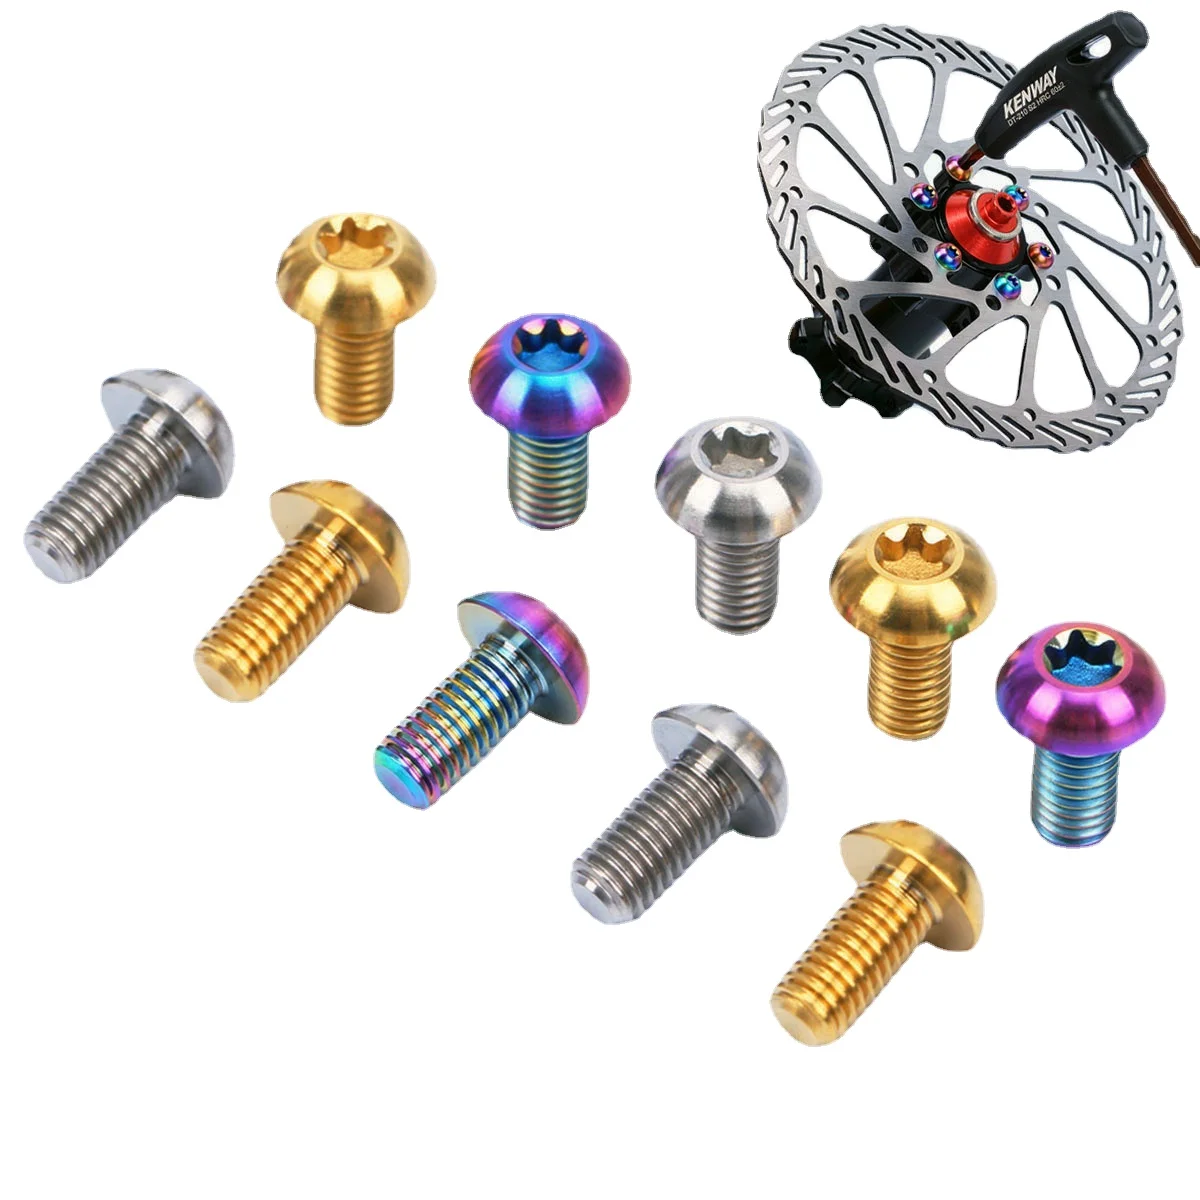 DXLing 12 Pieces Bike Disc Brake Rotor Bolts Alloy Disc Brake Rotor Bolts M5 x 10mm Disc Rotor Bolts Brake Rotor Screws with T25 Torx Head Wrench for Mountain Bike Road Bicycle Disc 